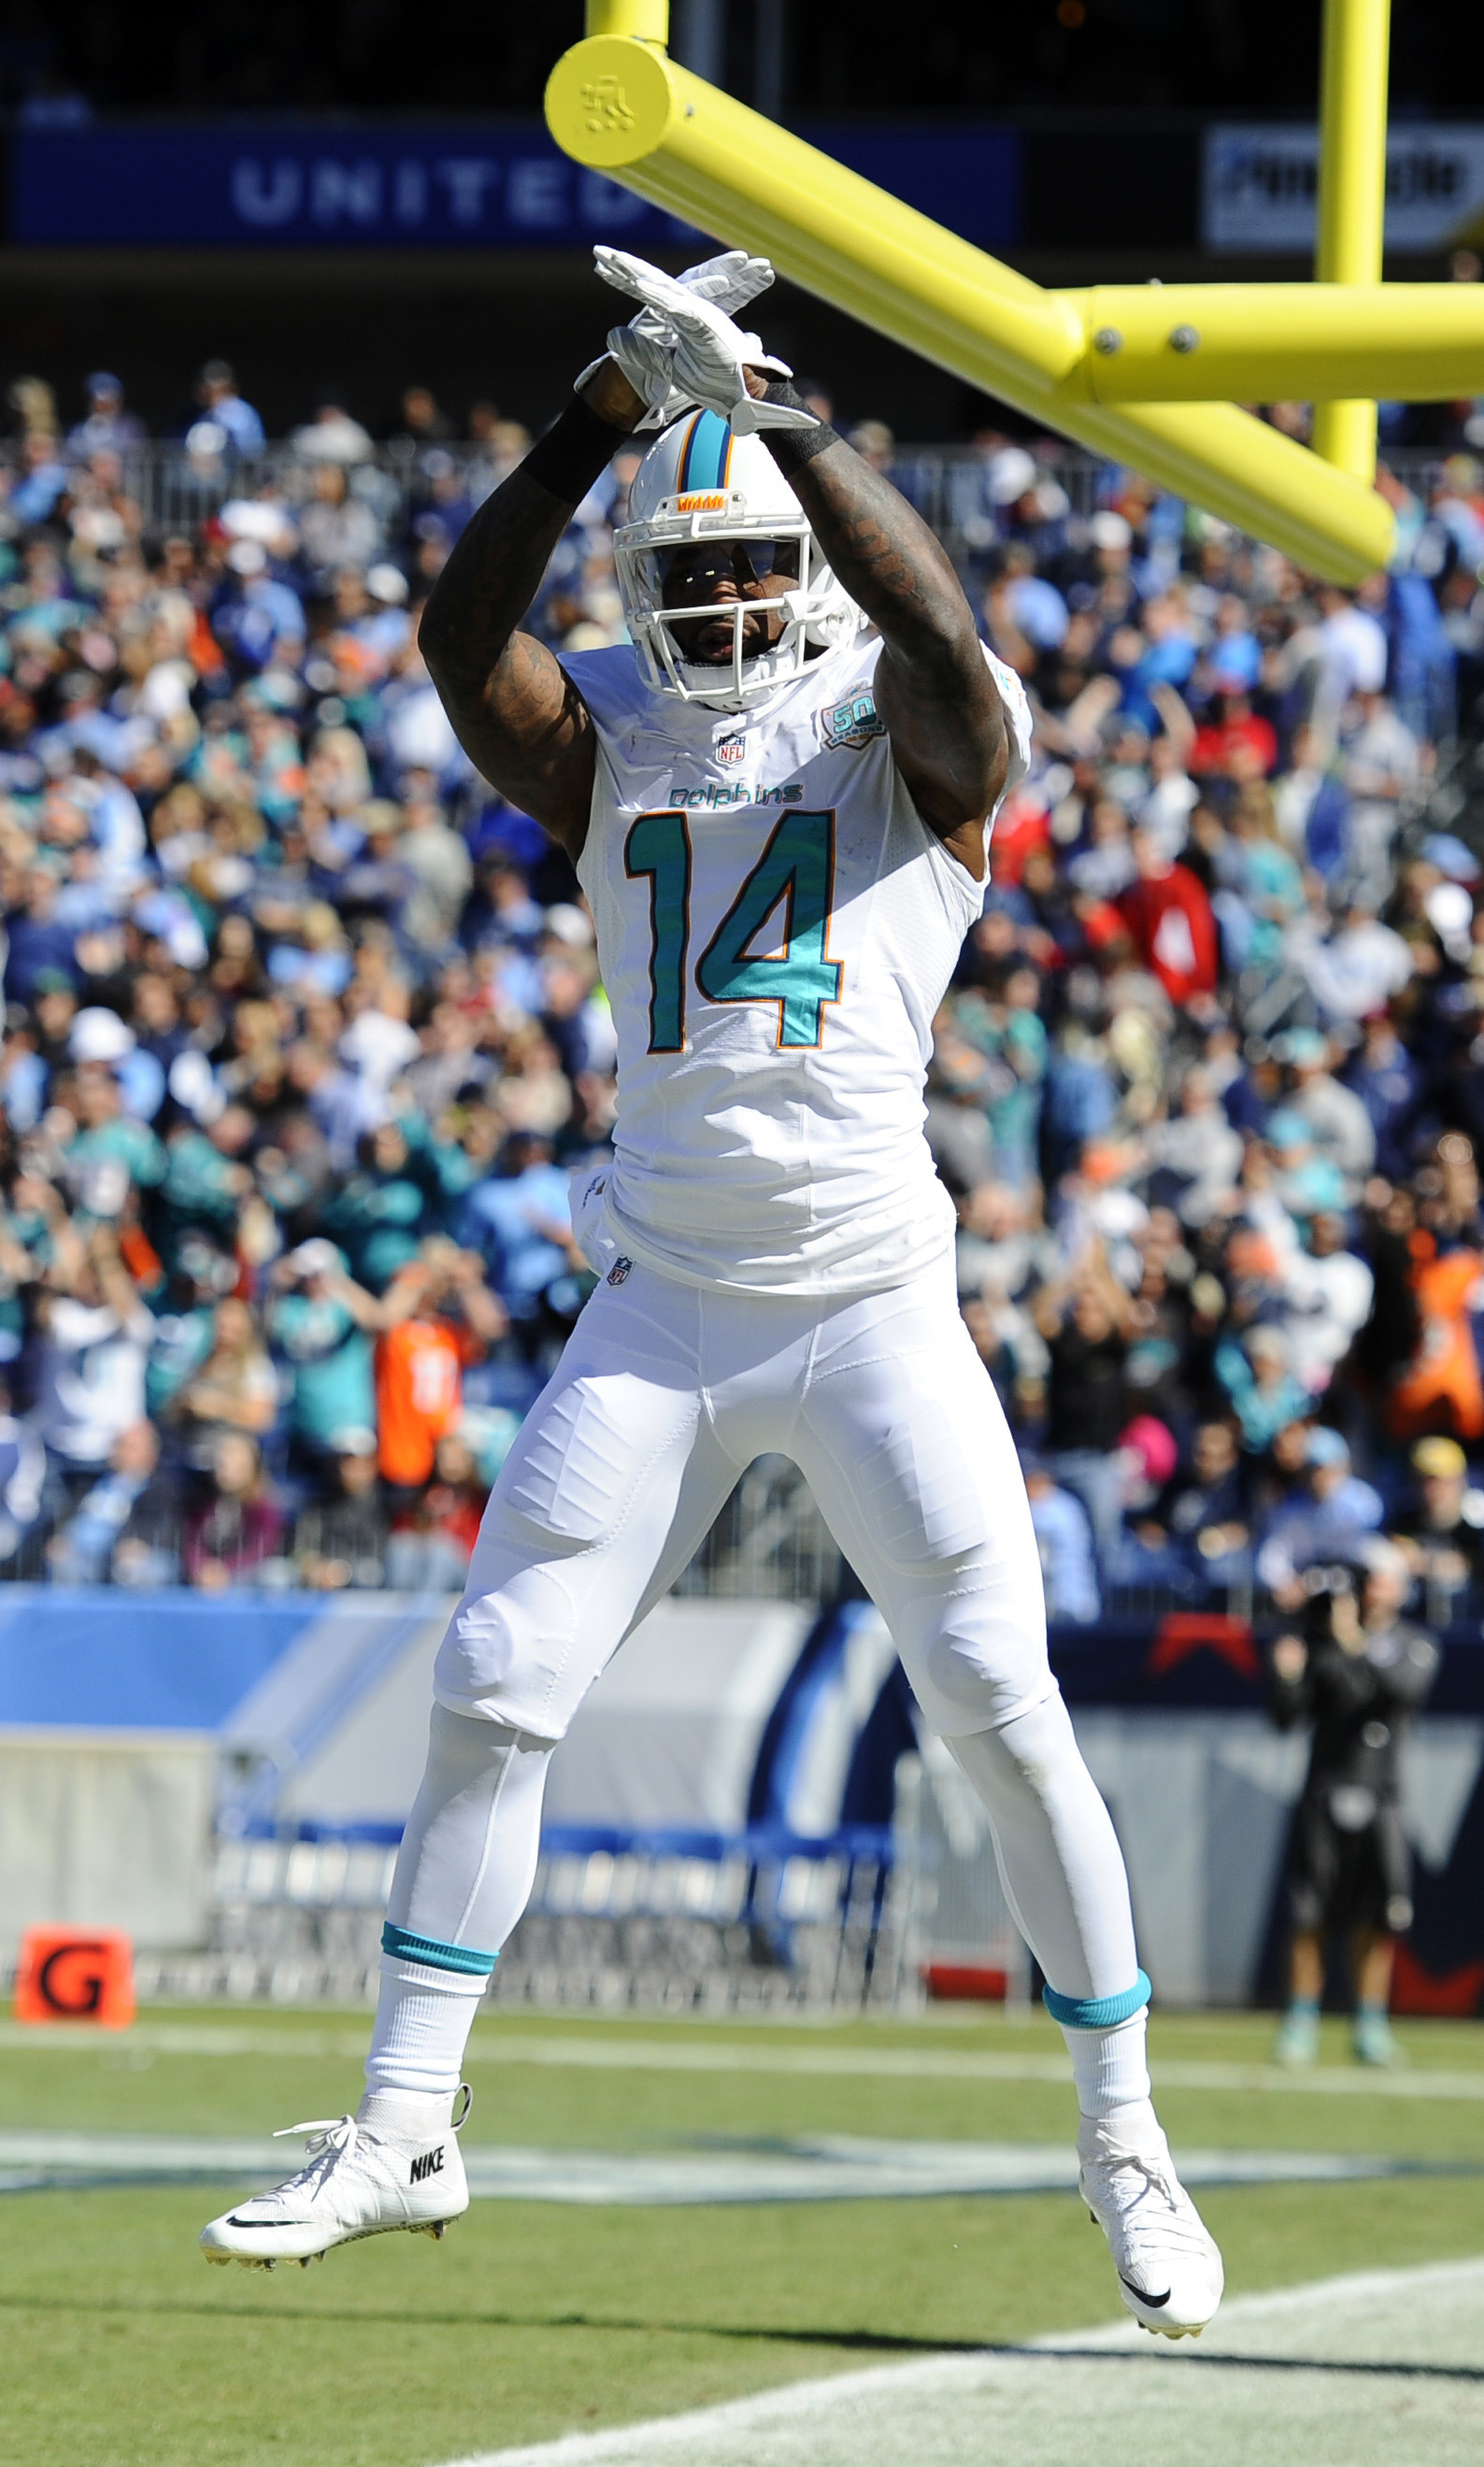 1588x2640 Miami Dolphins receiver Jarvis Landry (14) celebrates after scoring a  touchdown. Landry is